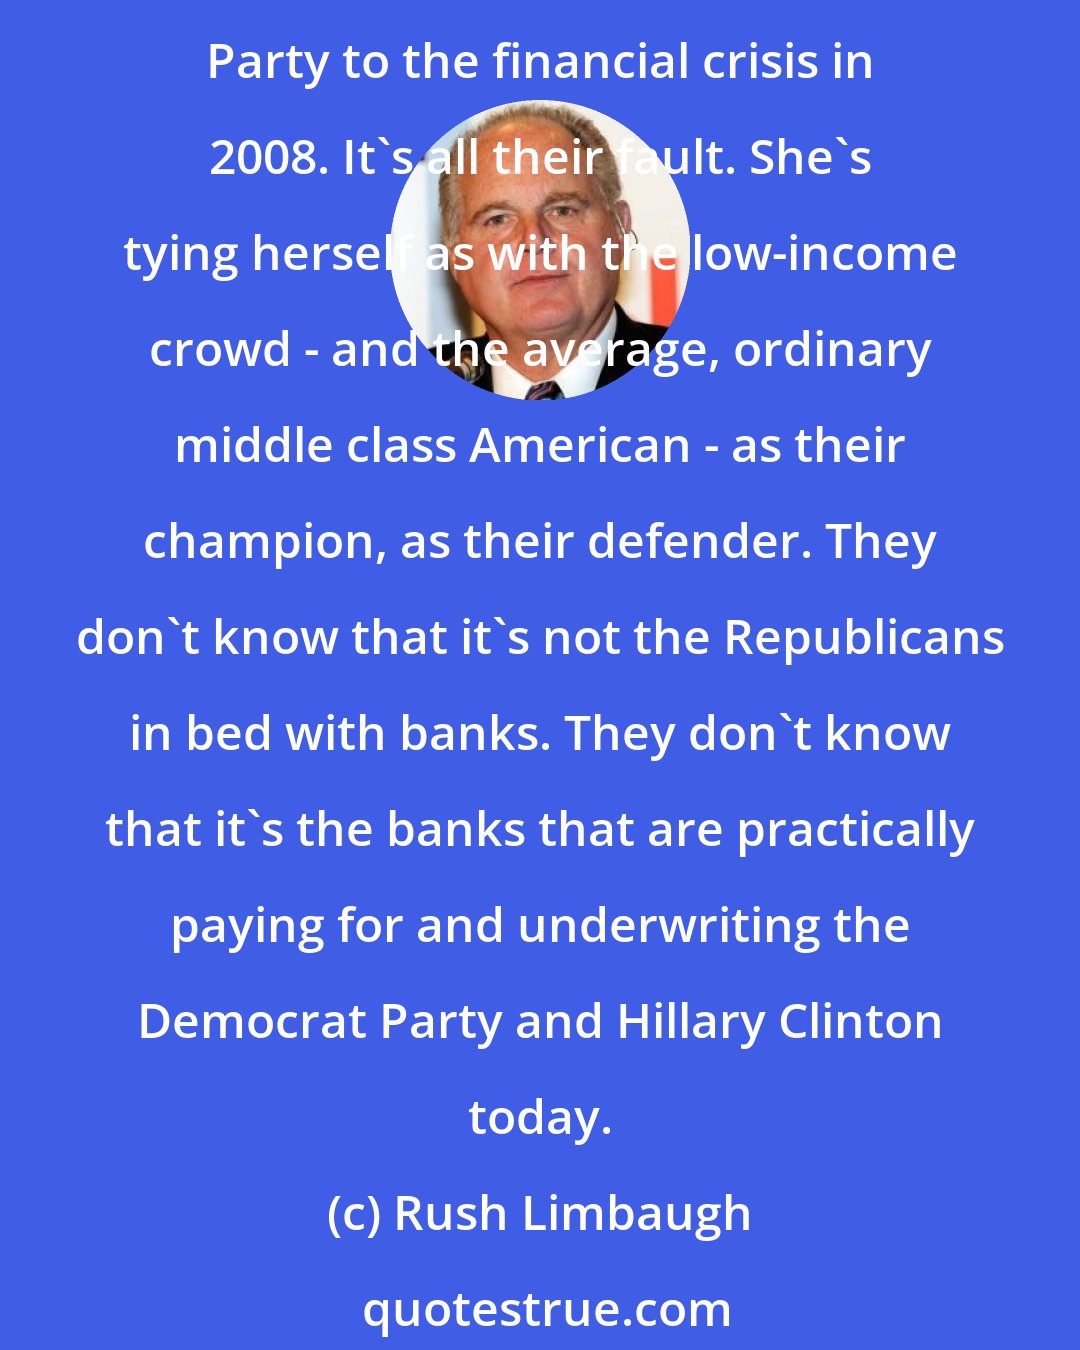 Rush Limbaugh: Here's Hillary Clinton getting away with tying the Republicans to rich people. She's tying the Republican Party to Wall Street, to the big banks. She's tying the Republican Party to the financial crisis in 2008. It's all their fault. She's tying herself as with the low-income crowd - and the average, ordinary middle class American - as their champion, as their defender. They don't know that it's not the Republicans in bed with banks. They don't know that it's the banks that are practically paying for and underwriting the Democrat Party and Hillary Clinton today.